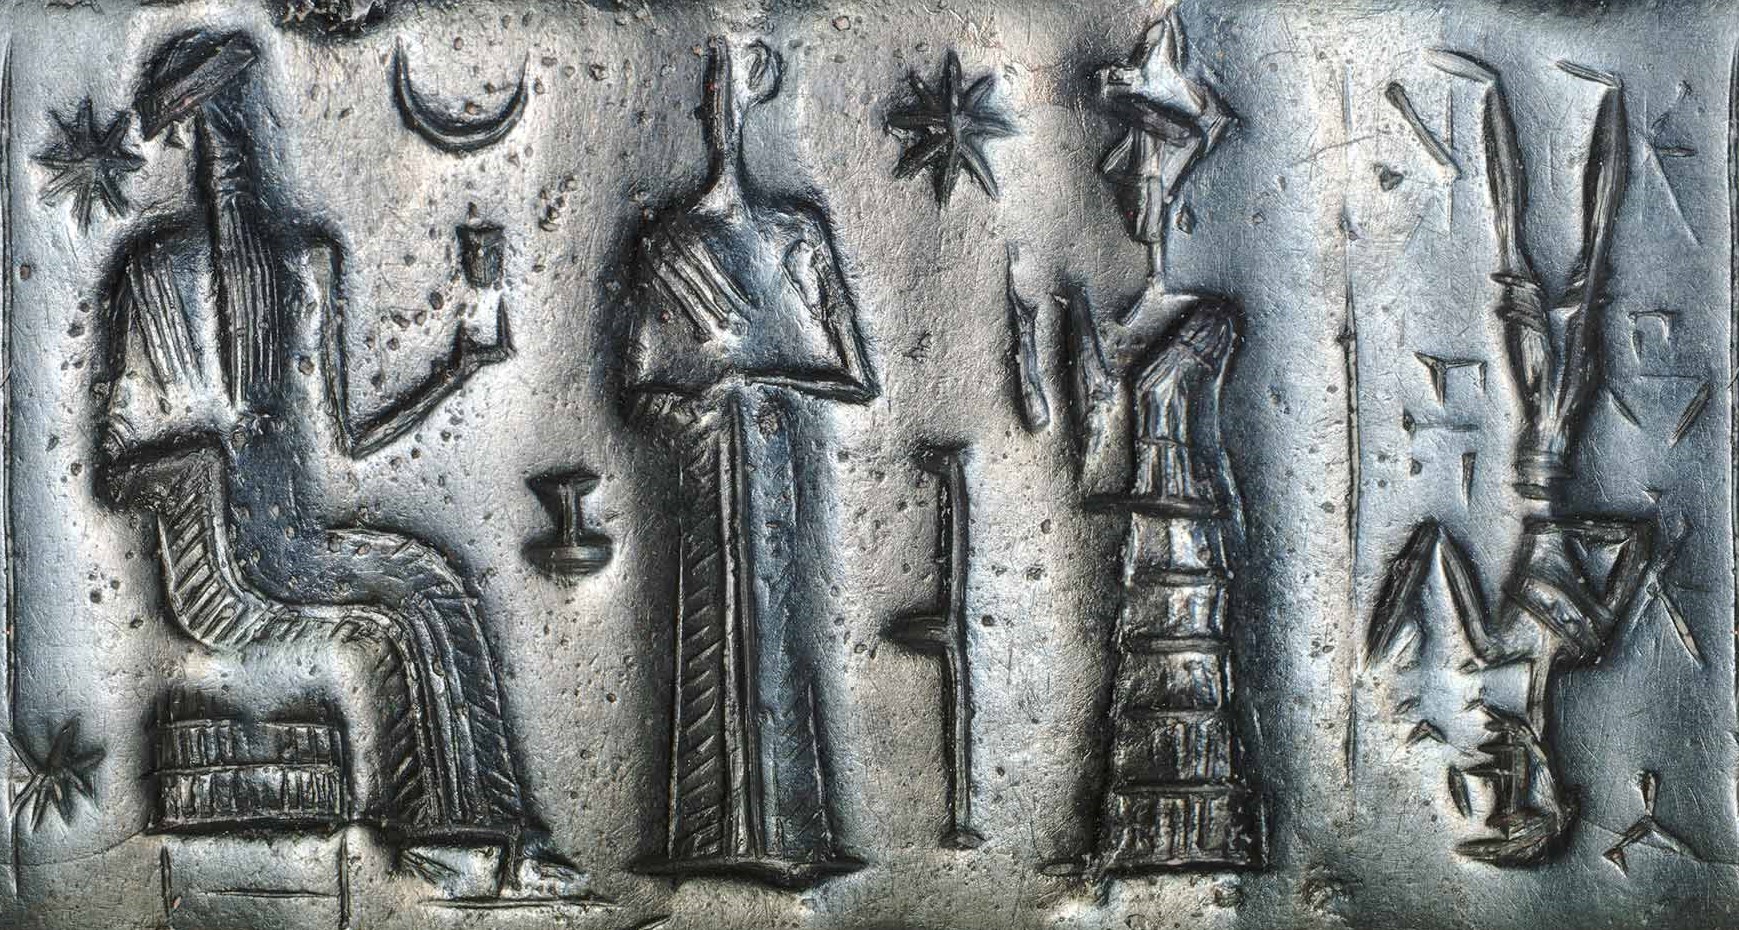 19 - Nannar, his son-in-law semi-divine mixed-breed king, & Ninsun, the king's goddess mother, dead past king upside-down; a scene so important that this artifact was made to commemorate the event for all time